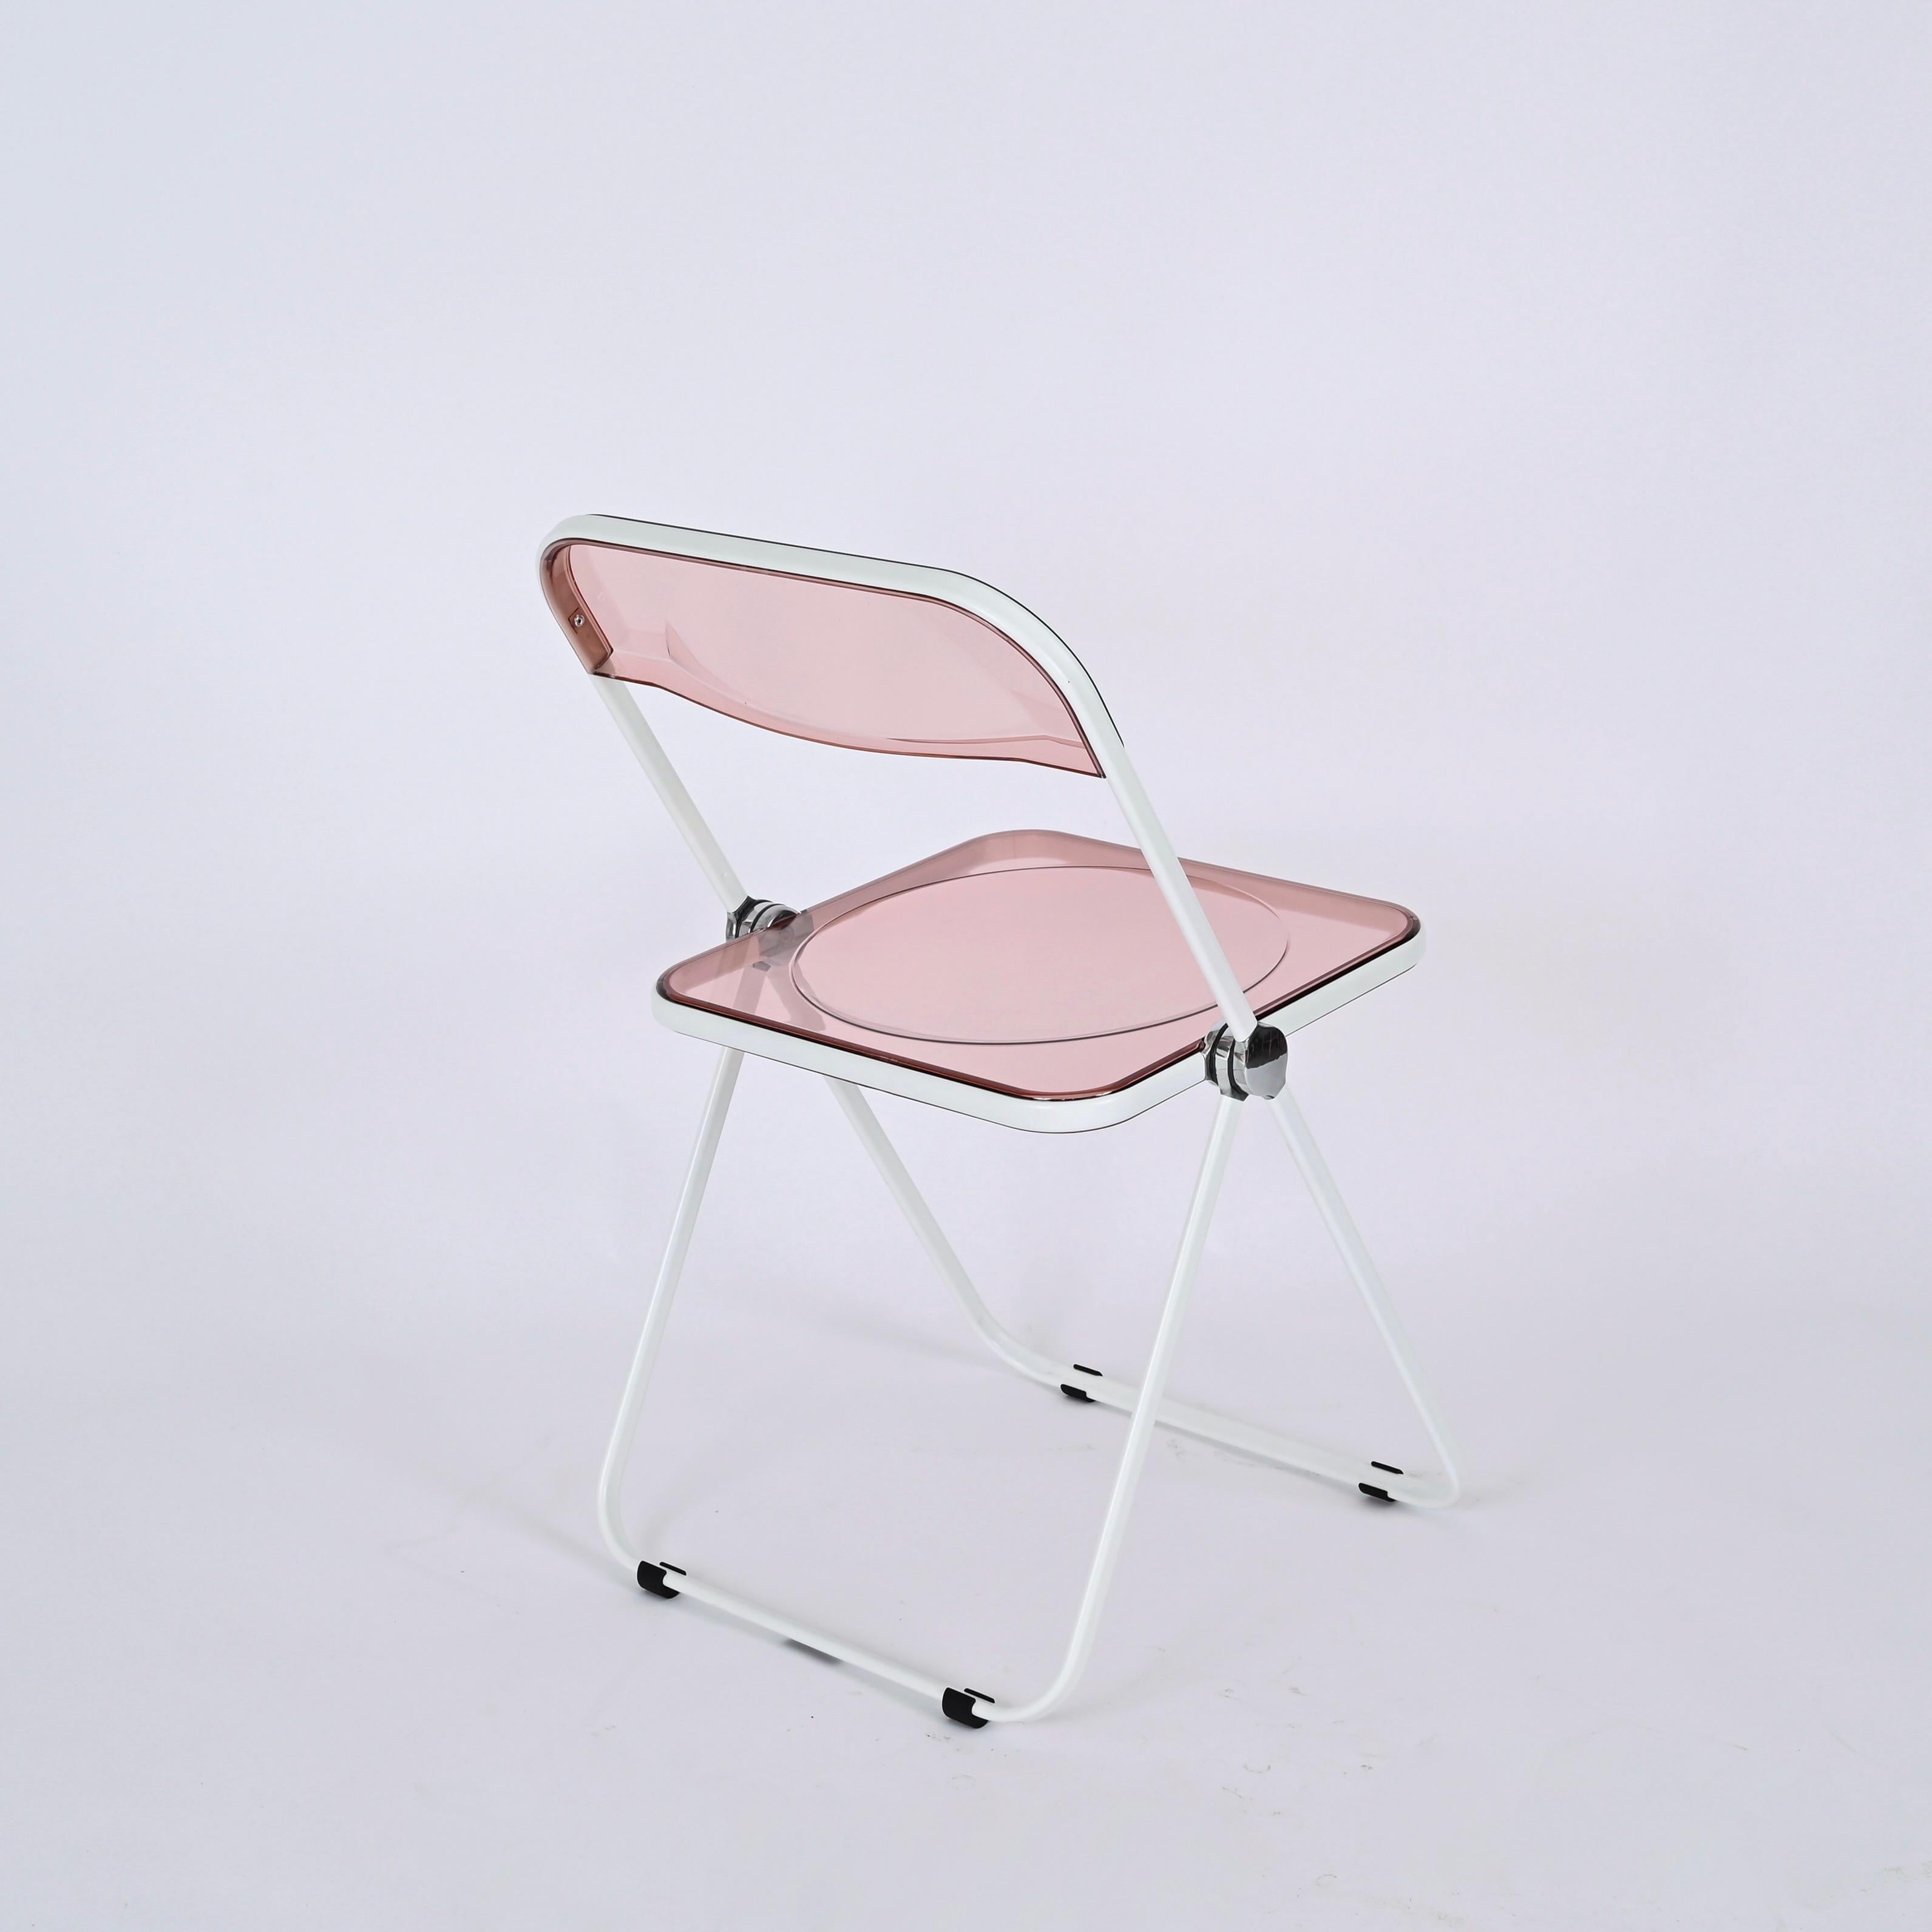 Giancarlo Piretti Lucite Pink and White Folding Plia Chairs for Castelli, 1970s In Excellent Condition For Sale In Roma, IT